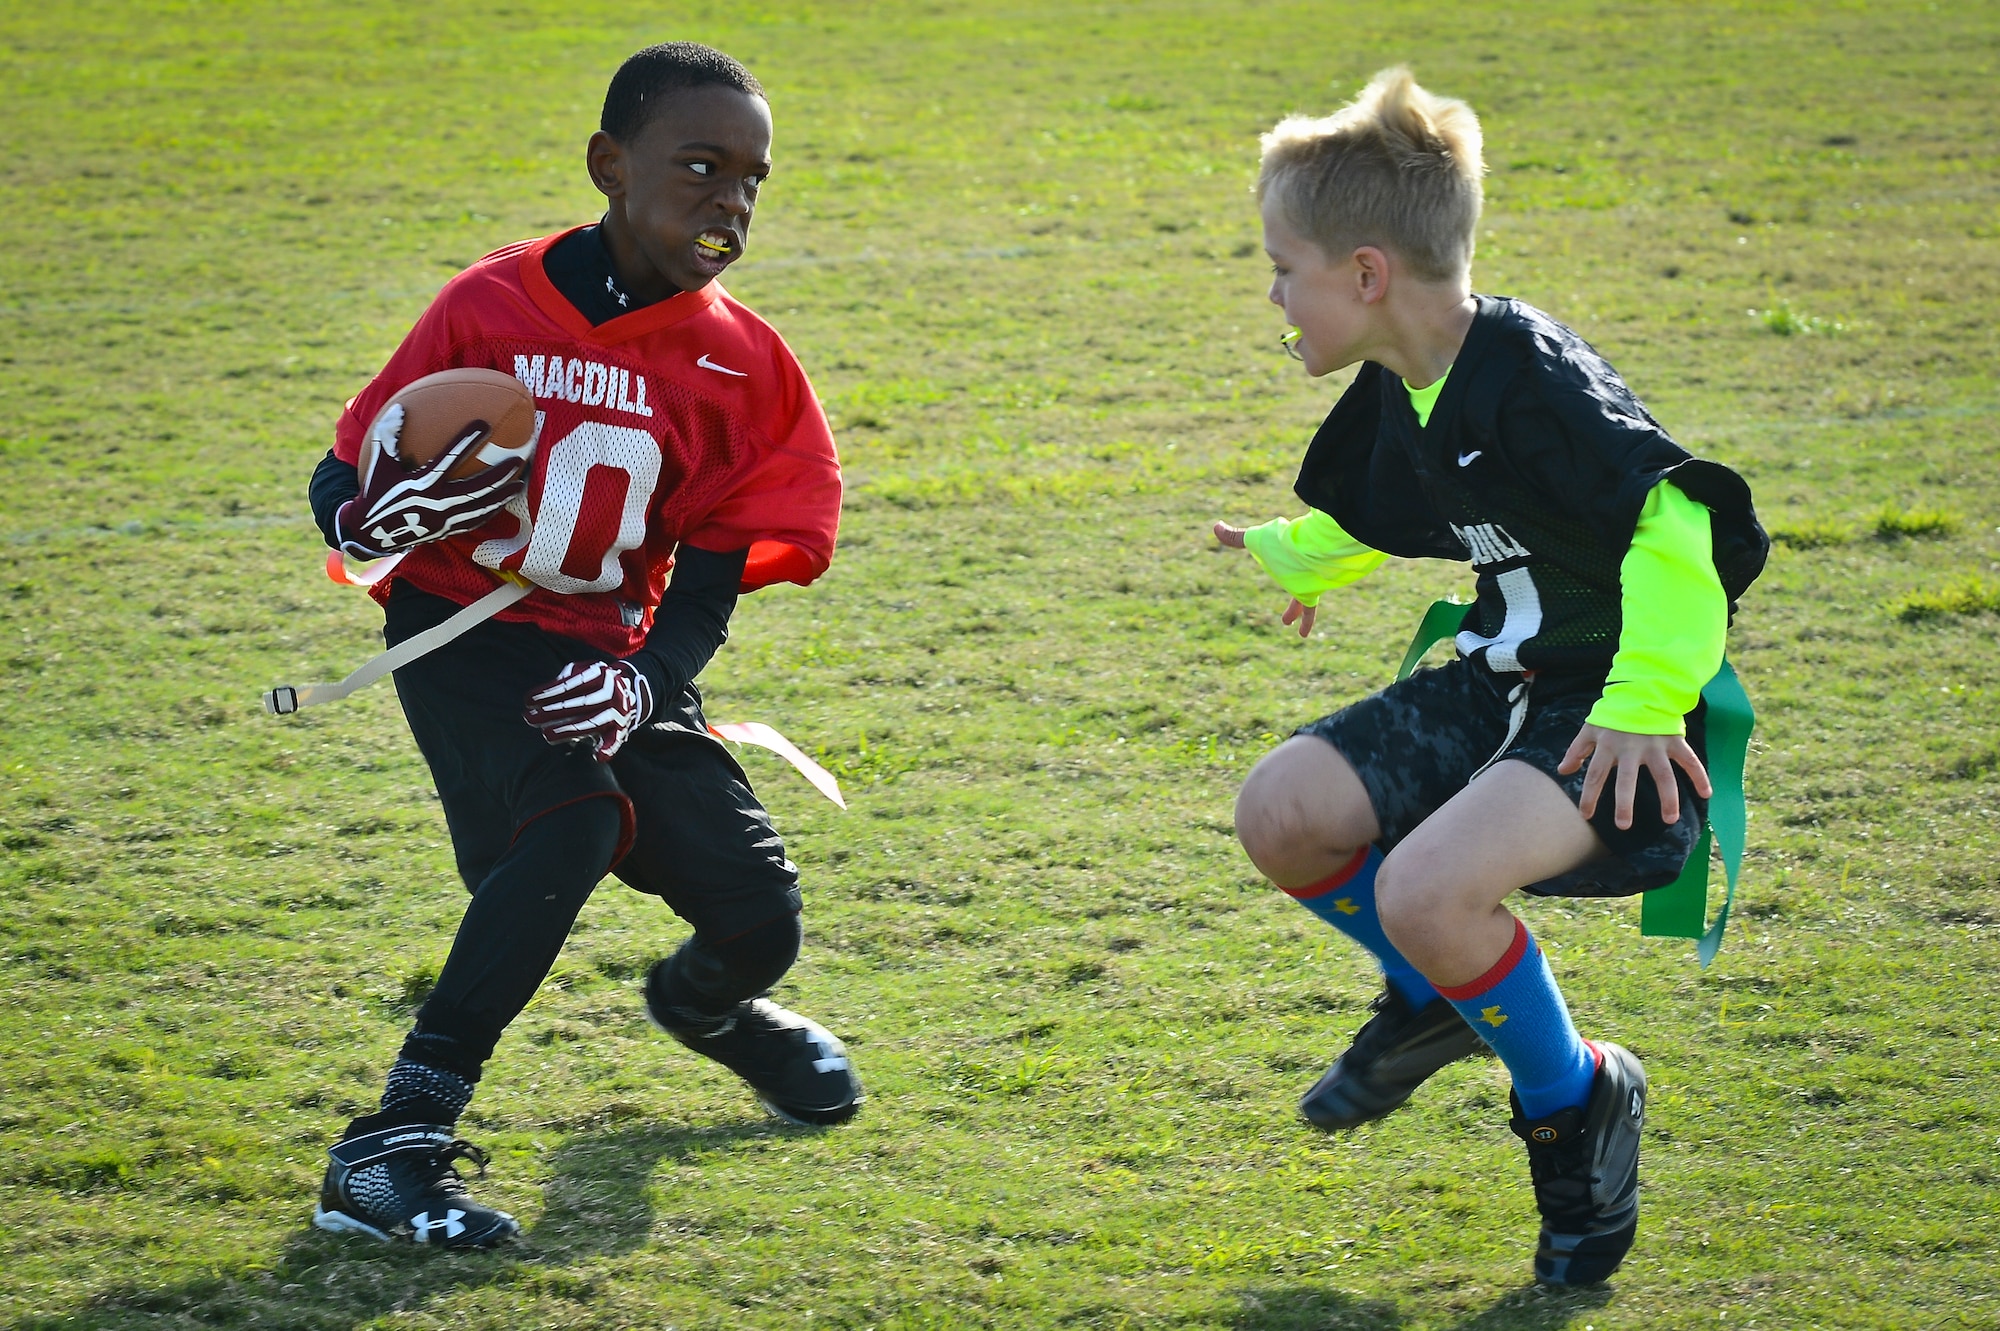 Two children play flag football as part of the youth program’s inaugural flag football season at MacDill Air Force Base, Fla., January 10, 2015. On average, the youth programs have anywhere from 80 through 200 participants and has room to grow for new kids. (U.S. Air Force photo by Senior Airman Ned T. Johnston/Released)